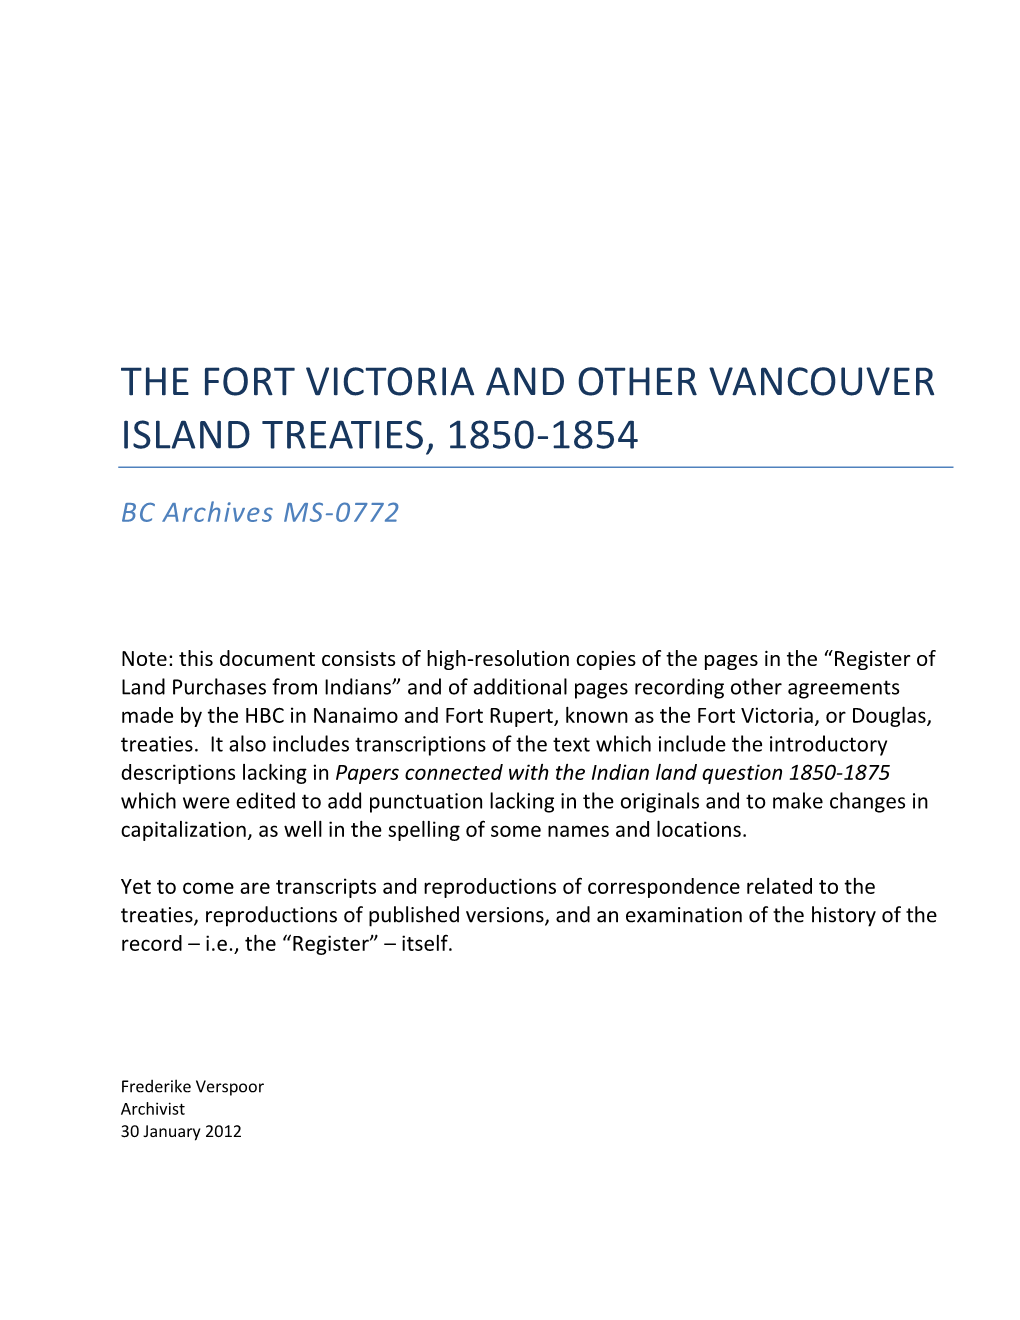 The Fort Victoria and Other Vancouver Island Treaties, 1850-1854